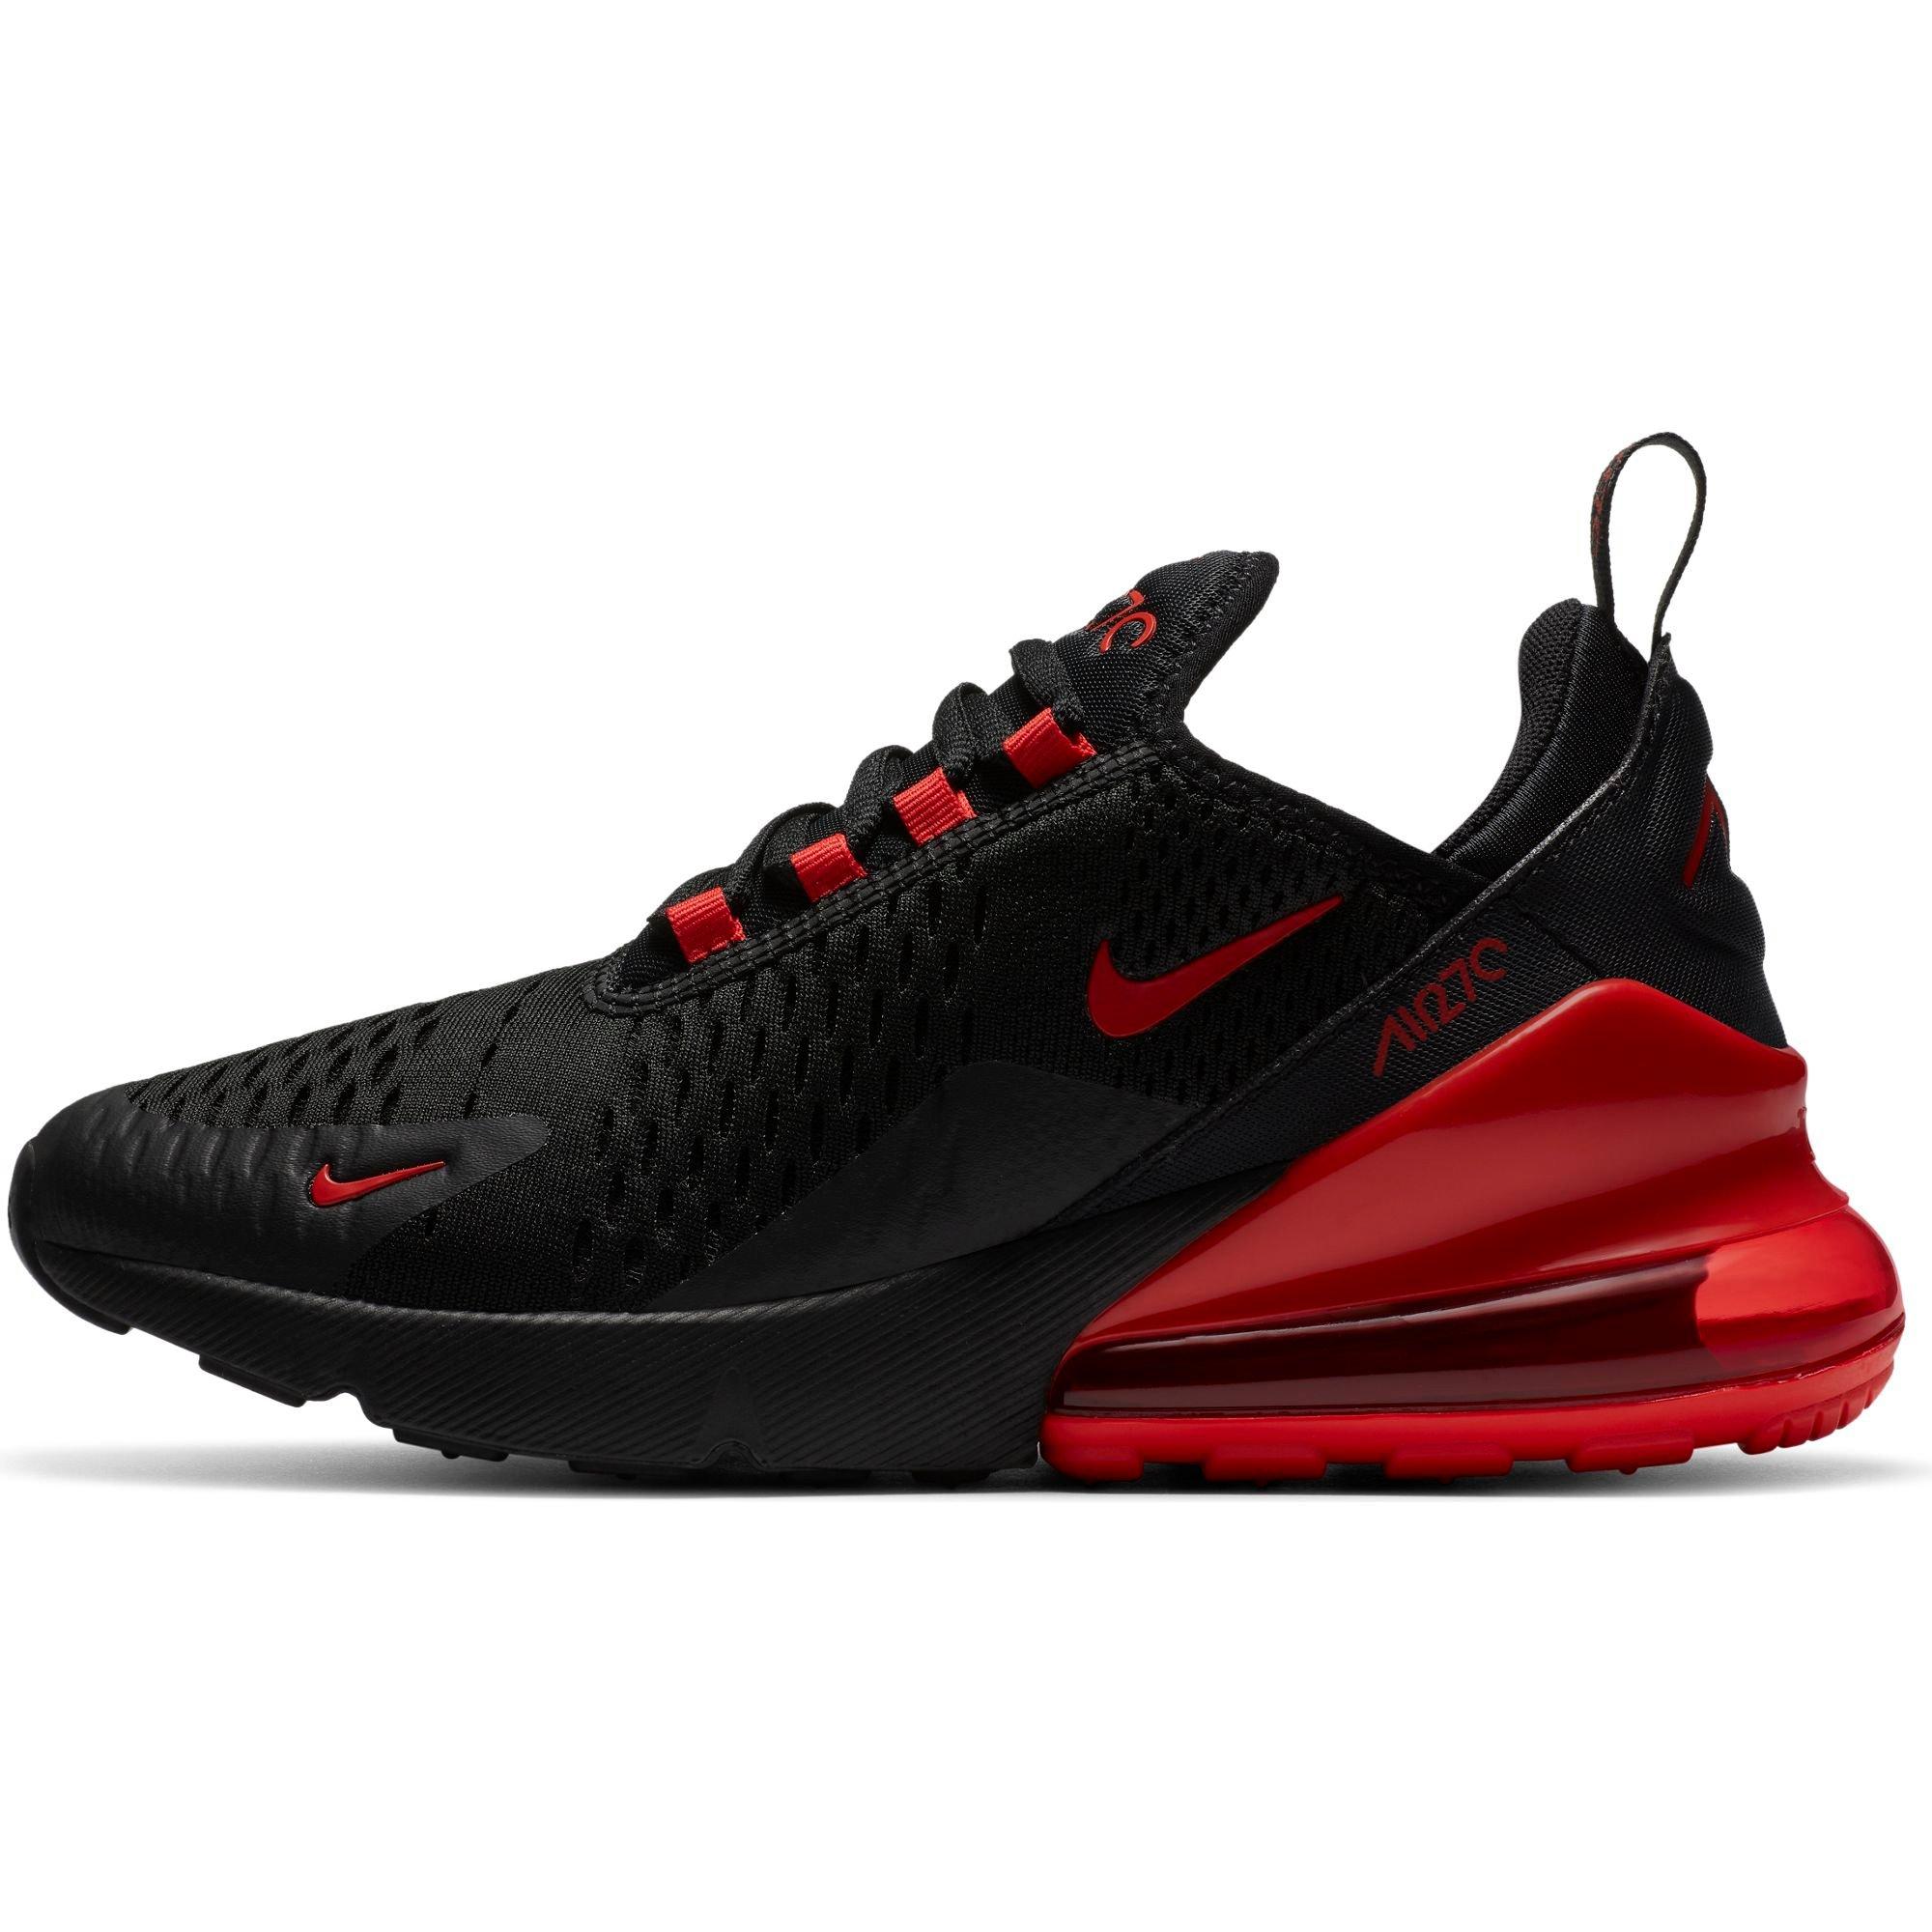 red white and black air max 270